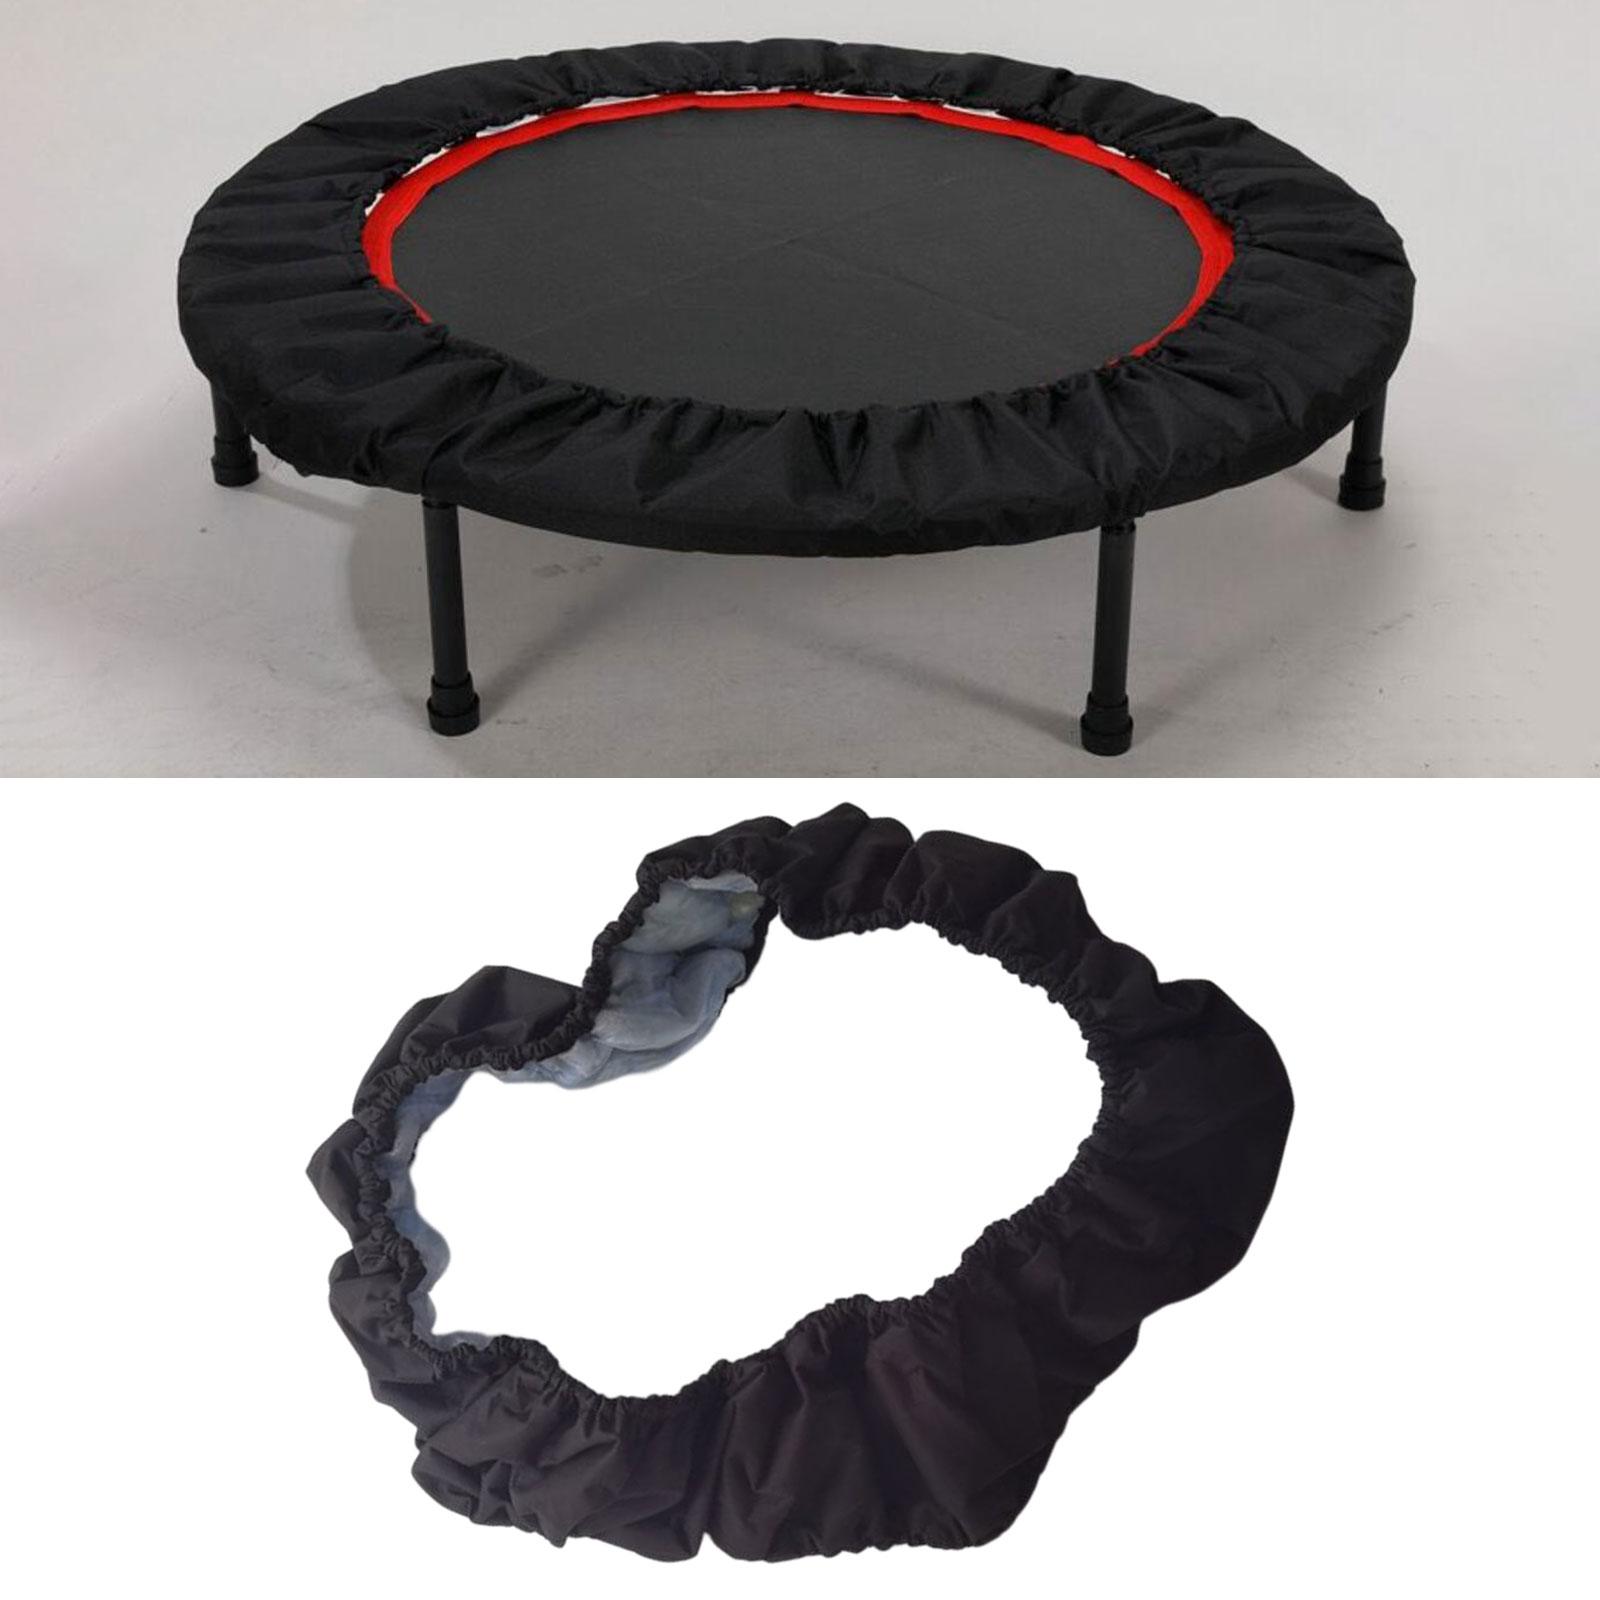 Trampoline Spring Cover Jumping Bed Cover Round Waterproof Easy to Install 50inch 8 Holes